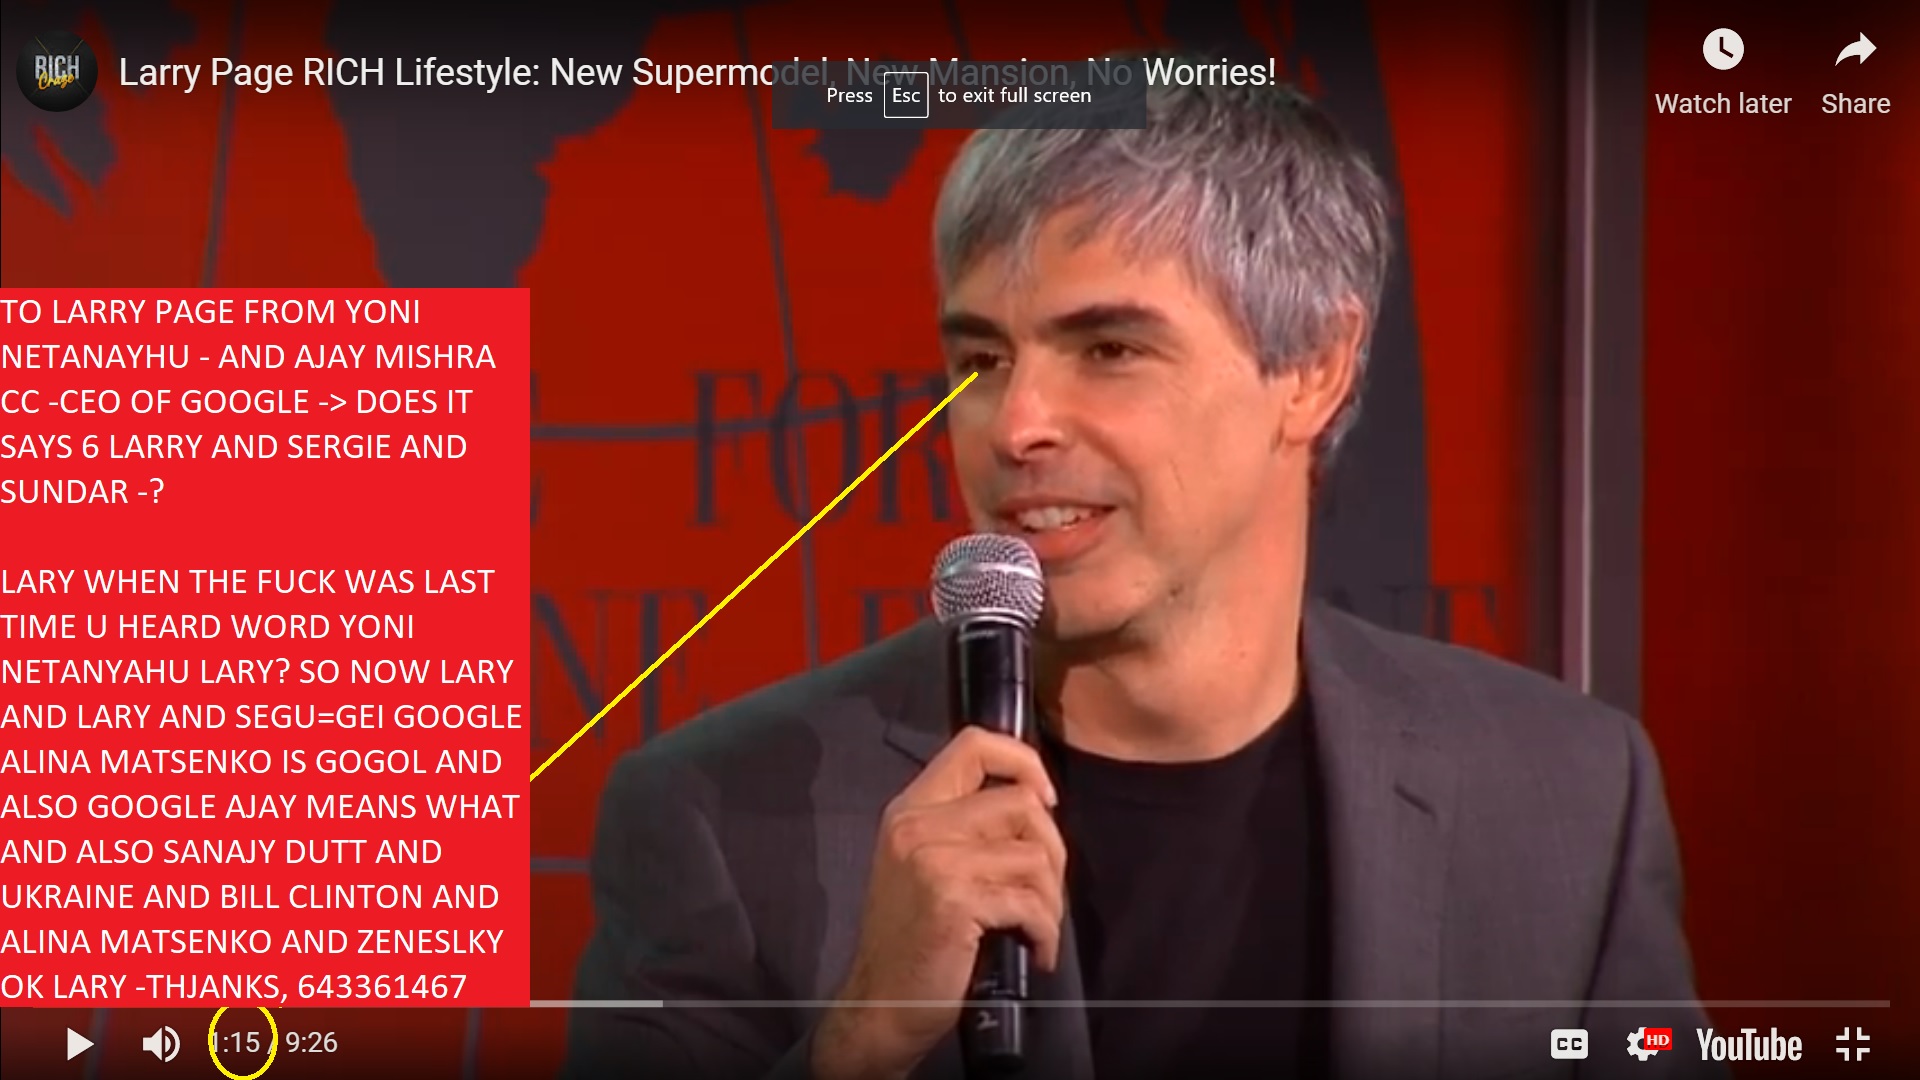 TO LARY OR LARRY PAGE JEW - ITEM SONG FROM YONI NETANYHU AND ALINA MATSENKO - DOE SIT SAY 6 SUNDAR AND ALRY PAGE